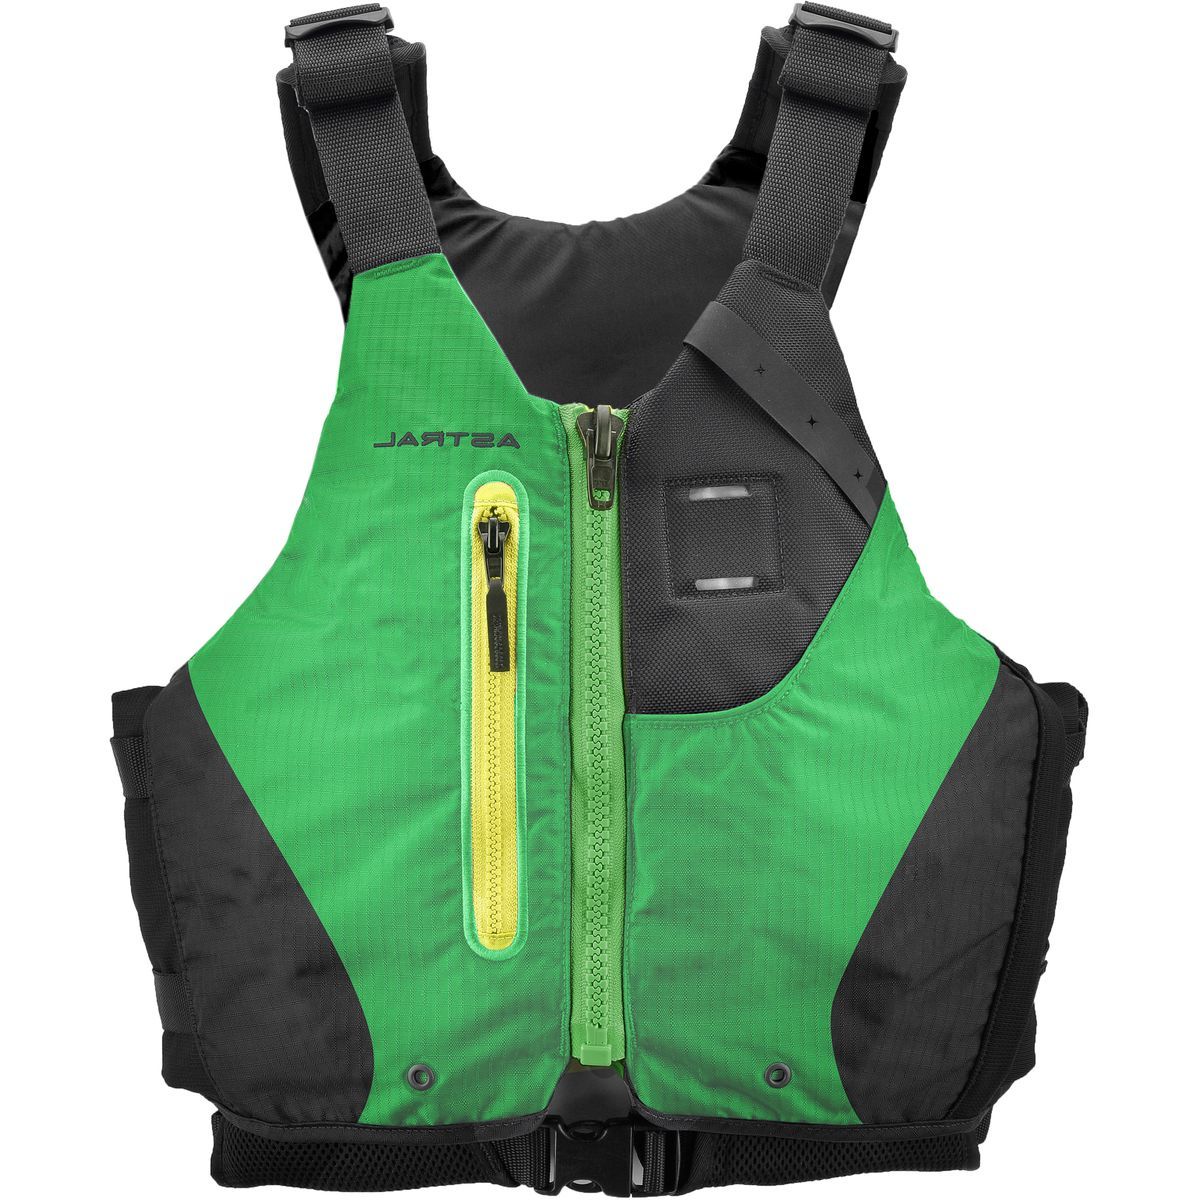 Astral Abba Personal Flotation Device - Women's